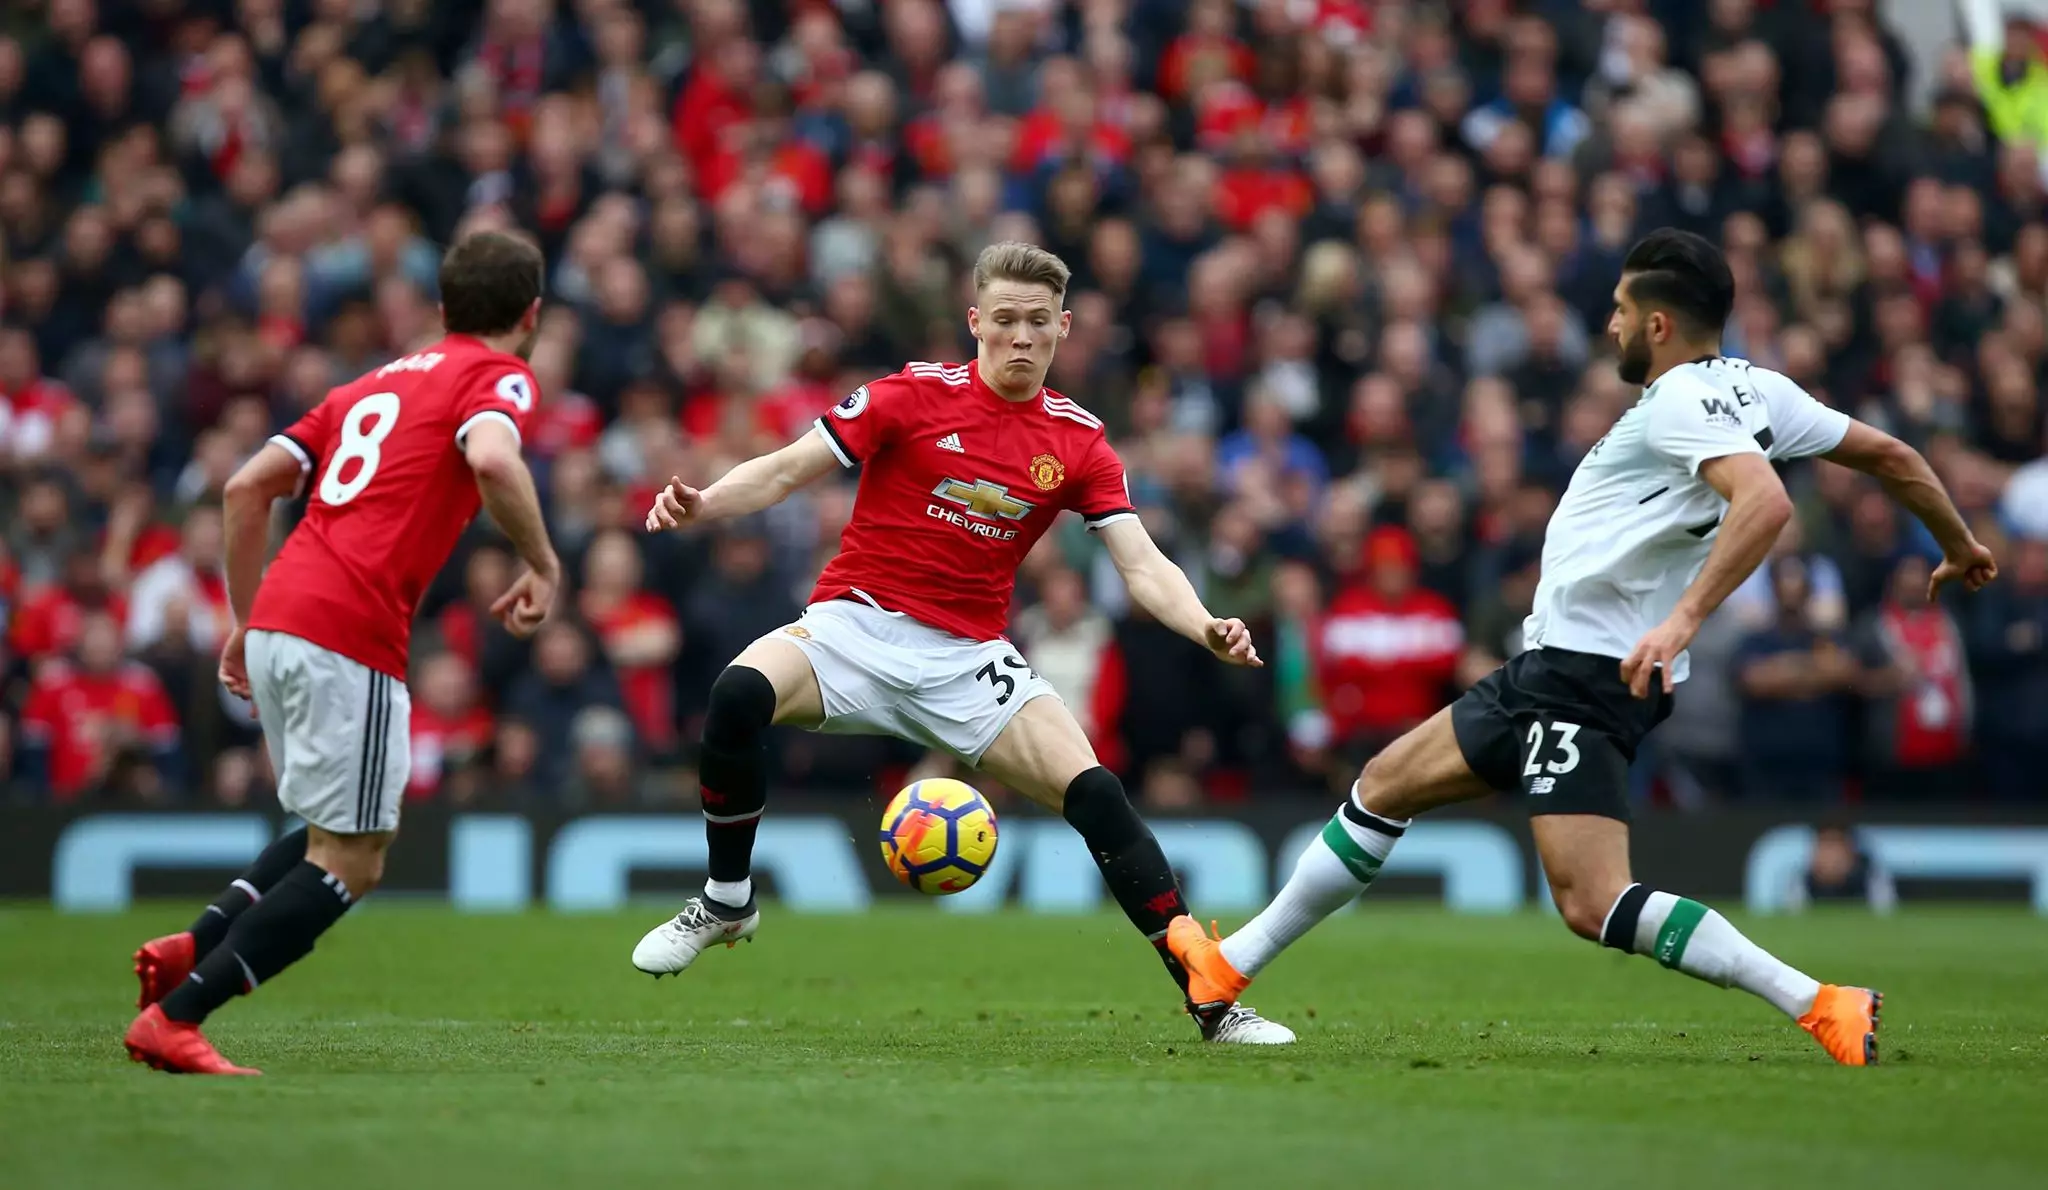 McTominay in action for United. Image: PA